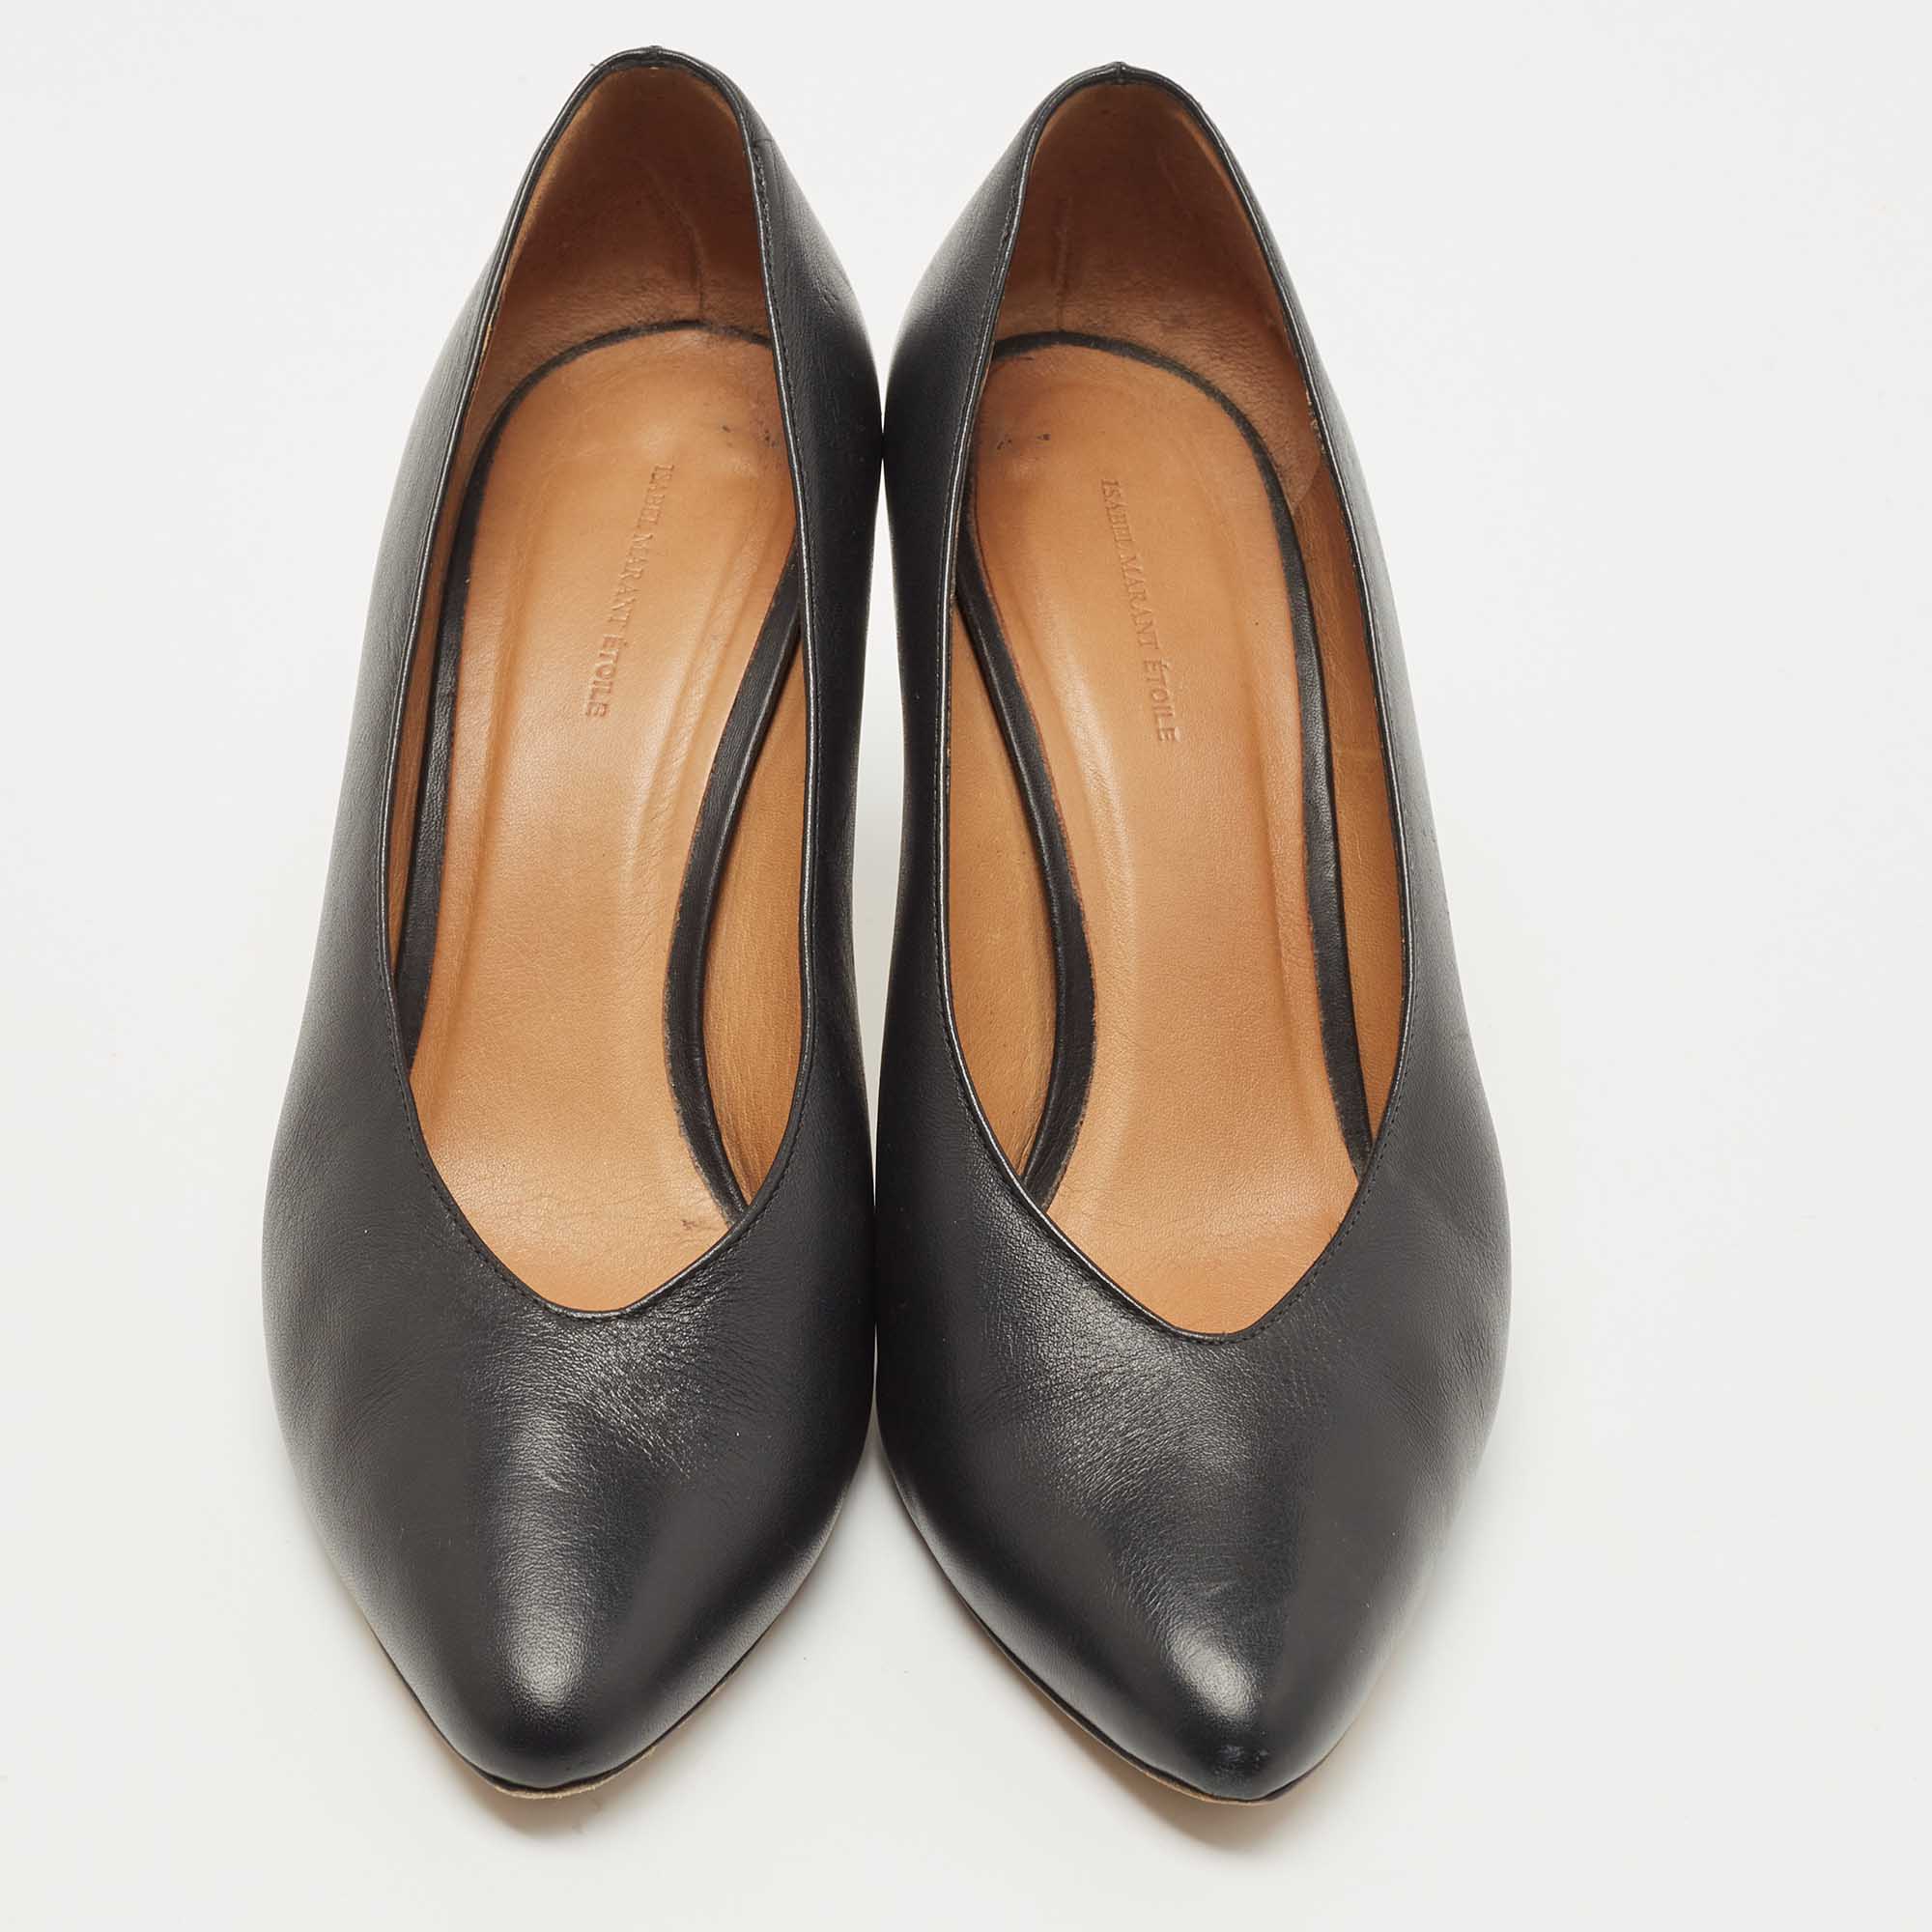 Isabel Marant Black Leather Pointed Toe Pumps Size 38